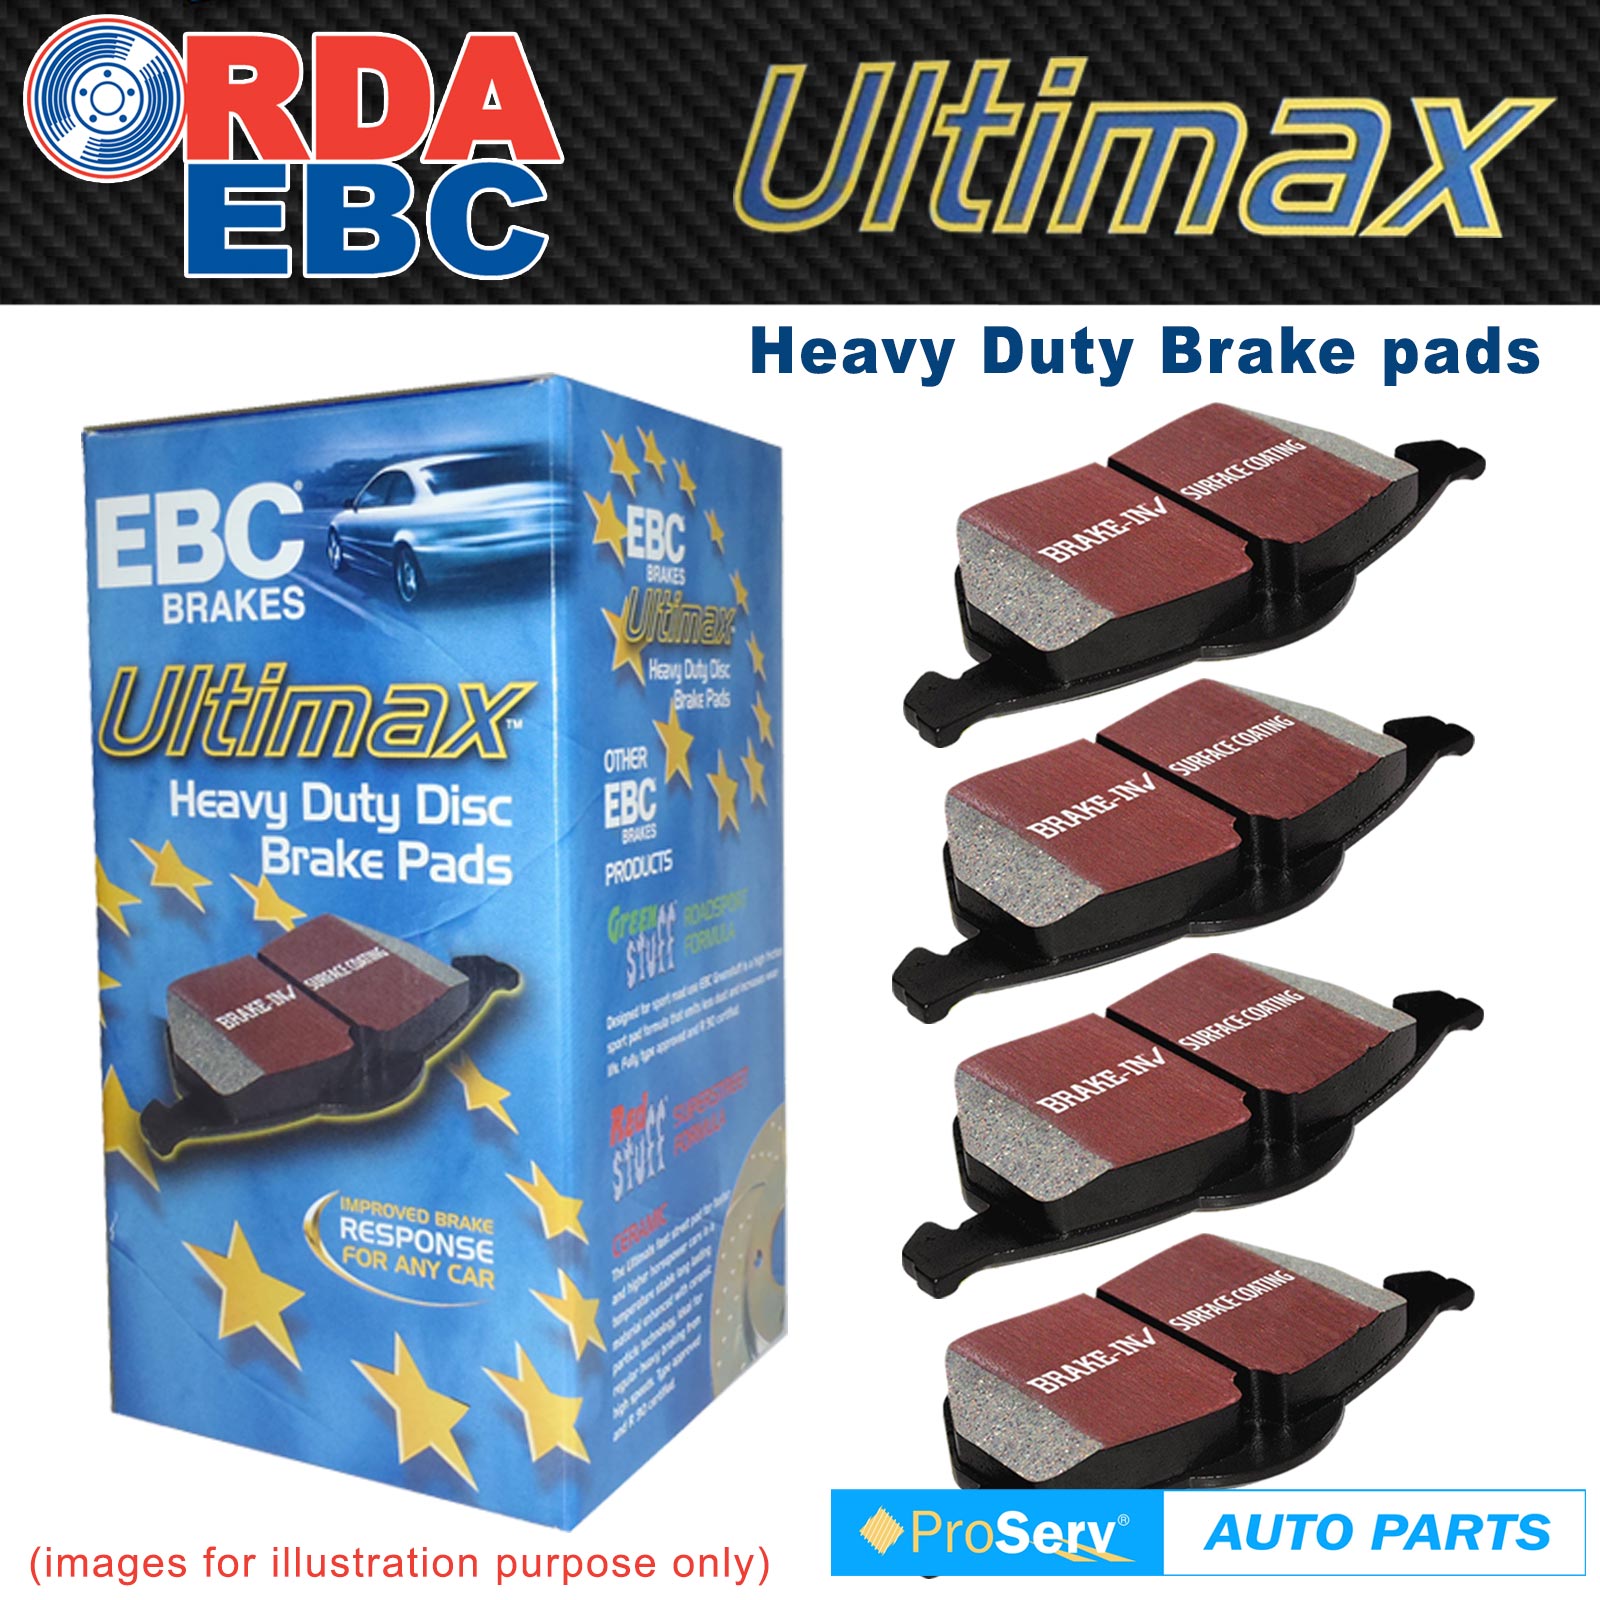 EBC Rear Brake Discs & Ultimax Pads for VW Crafter 35 2.5 TD 2006 > 11 